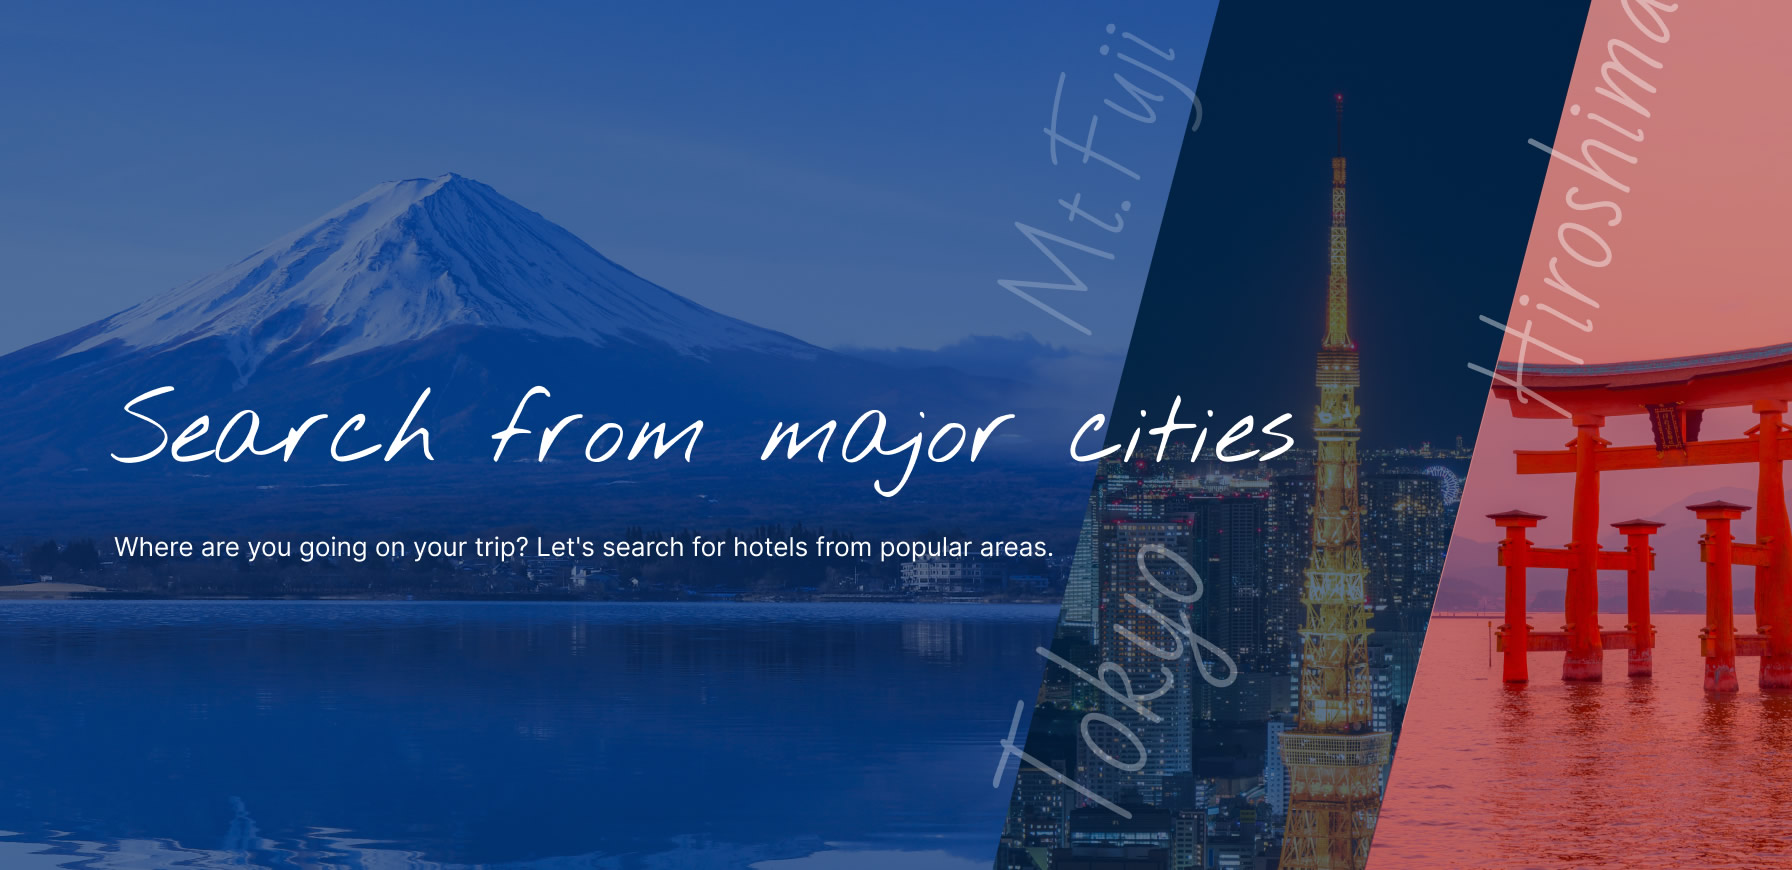 Search from major cities